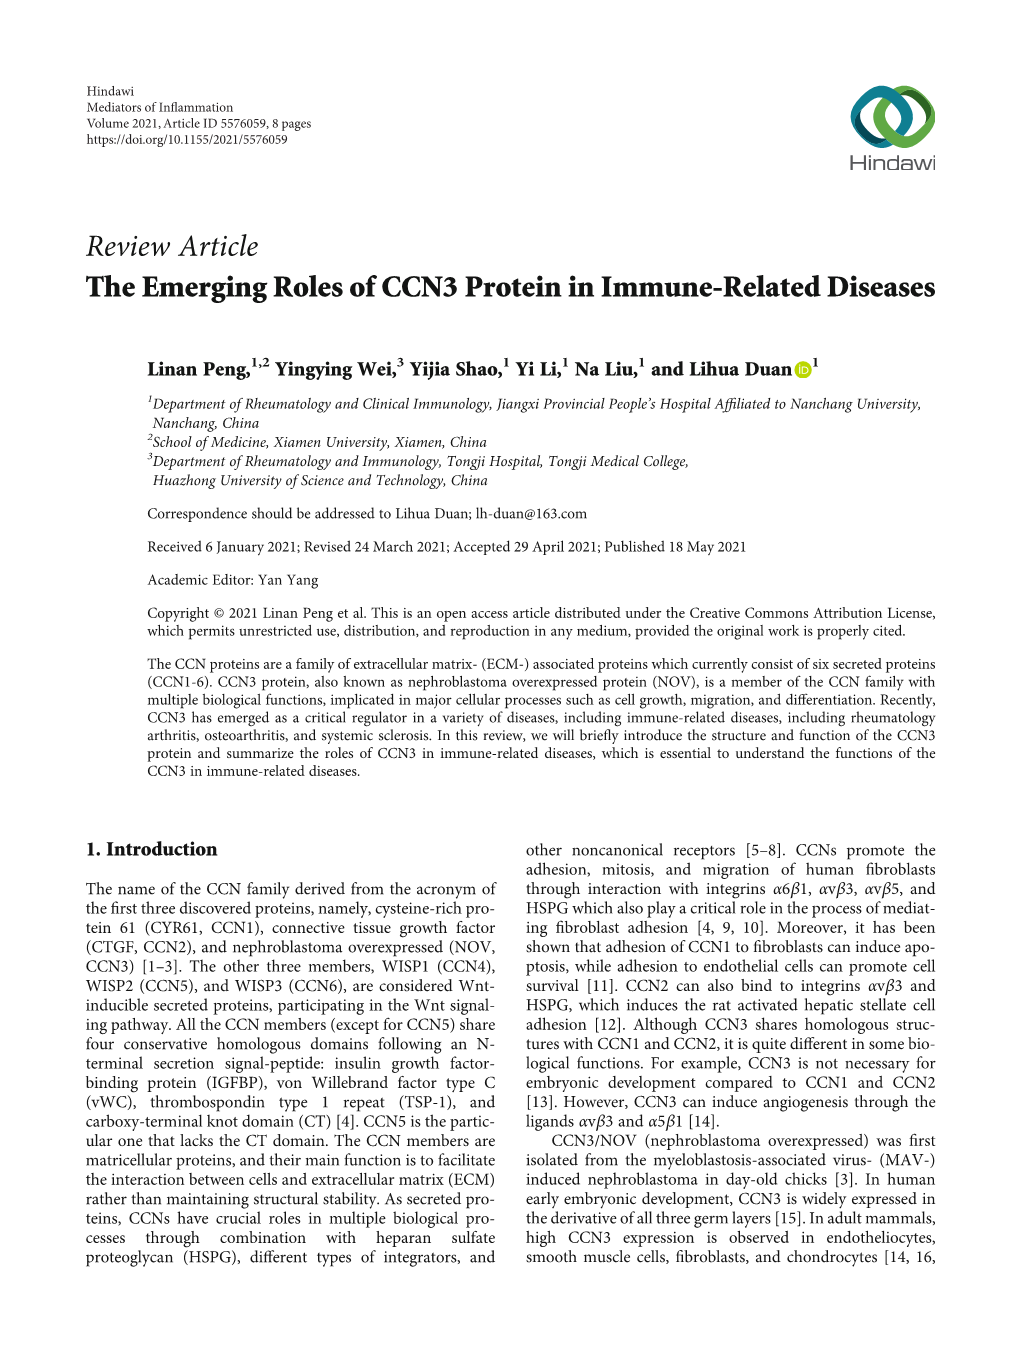 The Emerging Roles of CCN3 Protein in Immune-Related Diseases